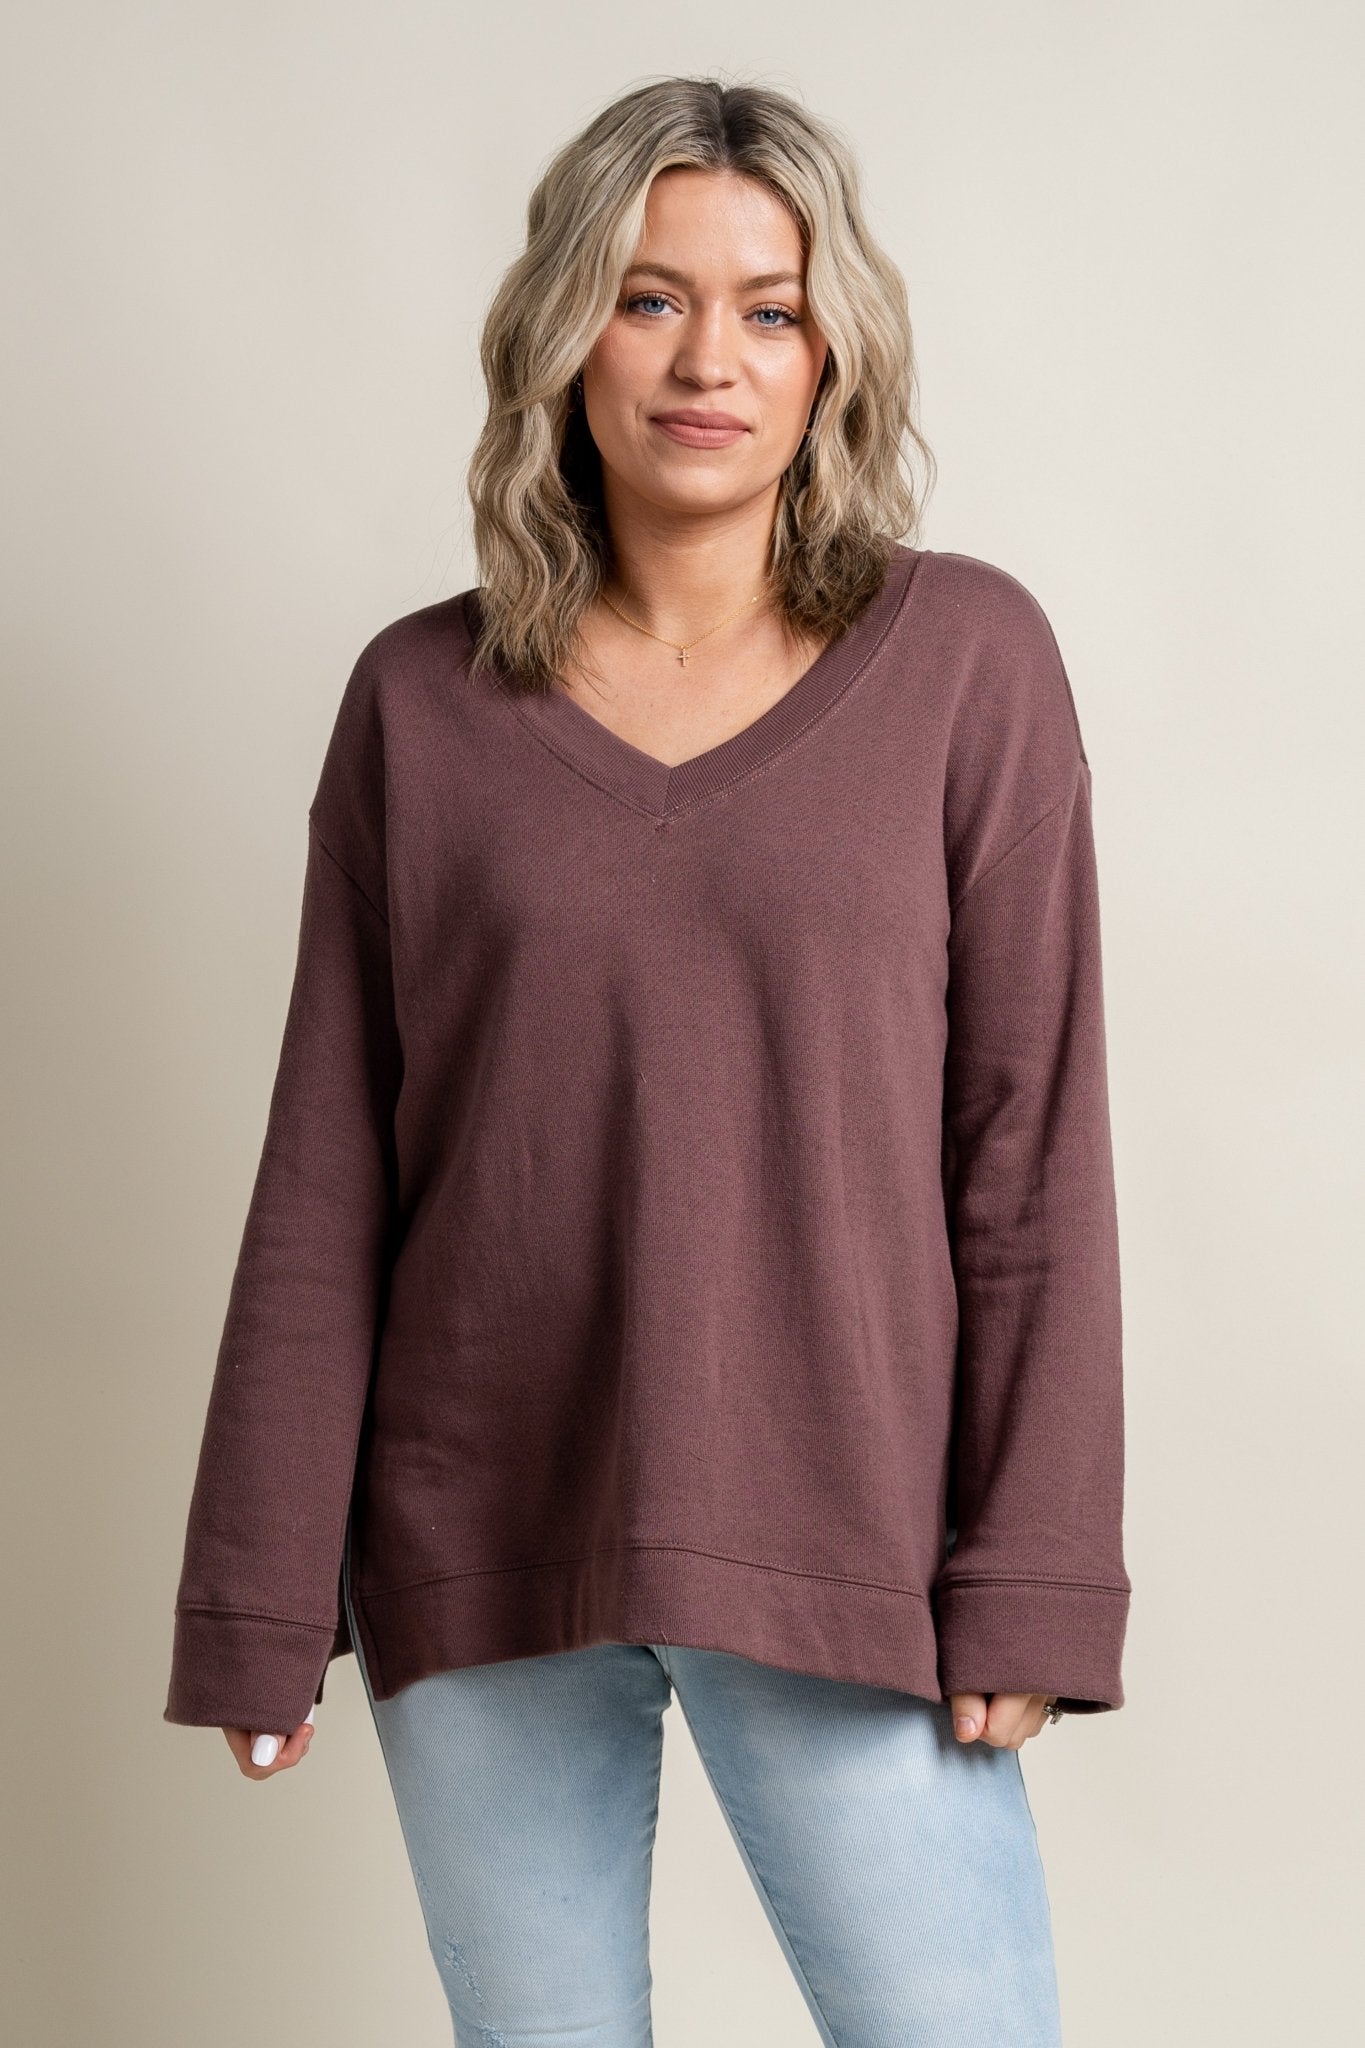 Z Supply Jeanette sweatshirt espresso - Z Supply Top - Z Supply Tops, Dresses, Tanks, Tees, Cardigans, Joggers and Loungewear at Lush Fashion Lounge